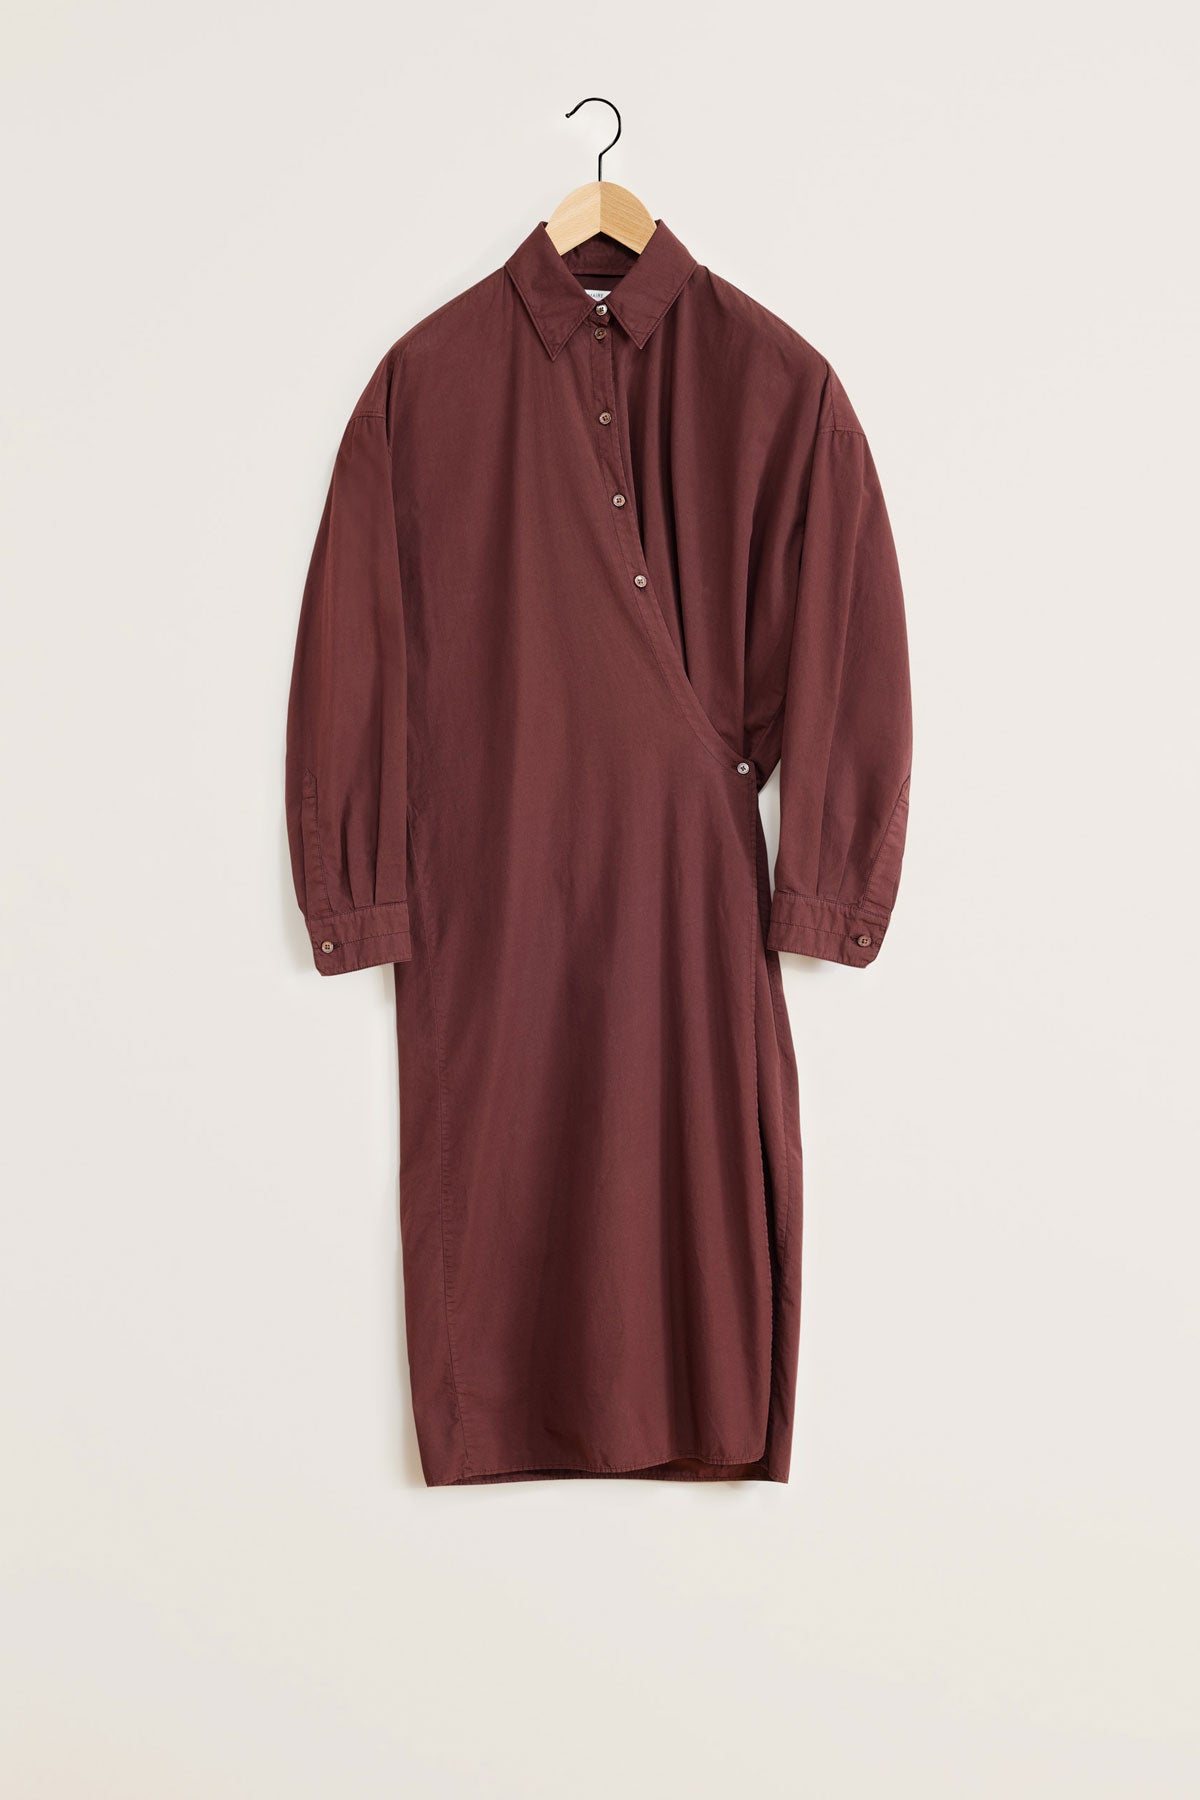 Lemaire — Straight Collar Twisted Dress / Cocoa Bean